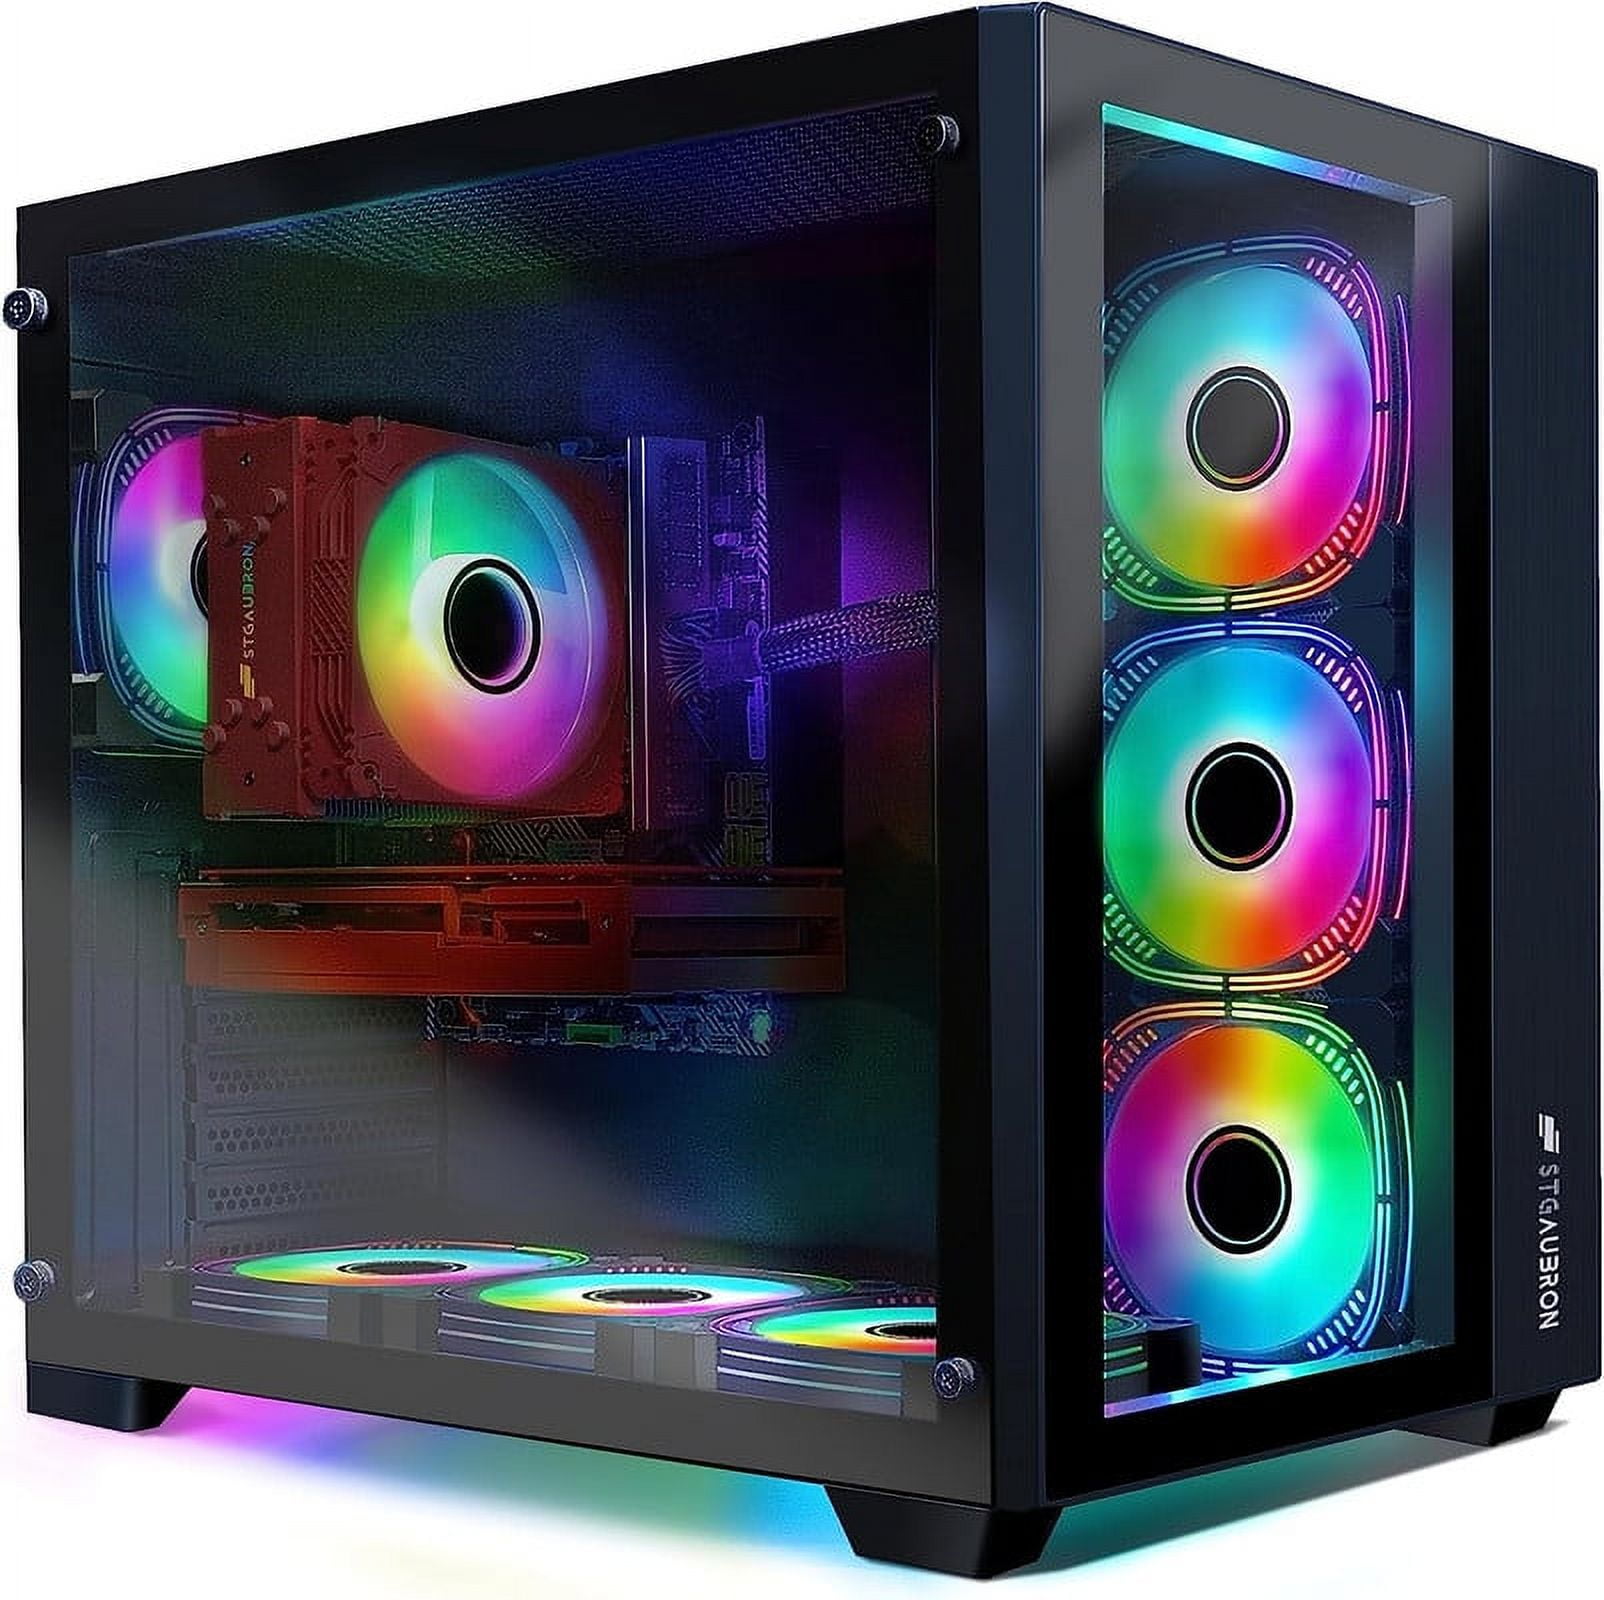 $1 League of Legends Gaming PC- 720p Gaming for the price of a KitKat! 